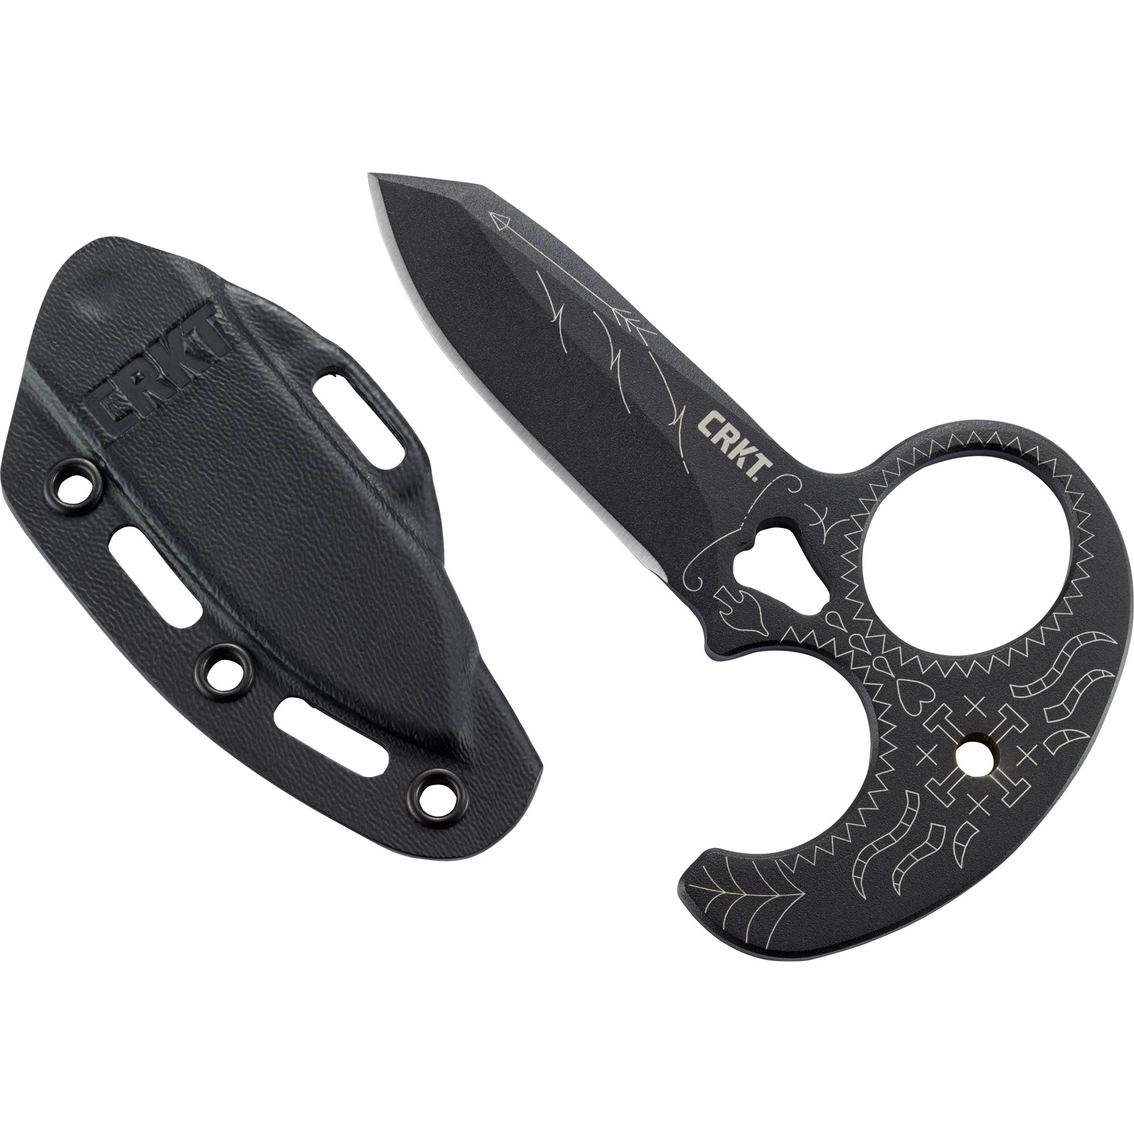 Columbia River Knife & Tool Tecpatl Fixed Blade Knife - Image 2 of 4